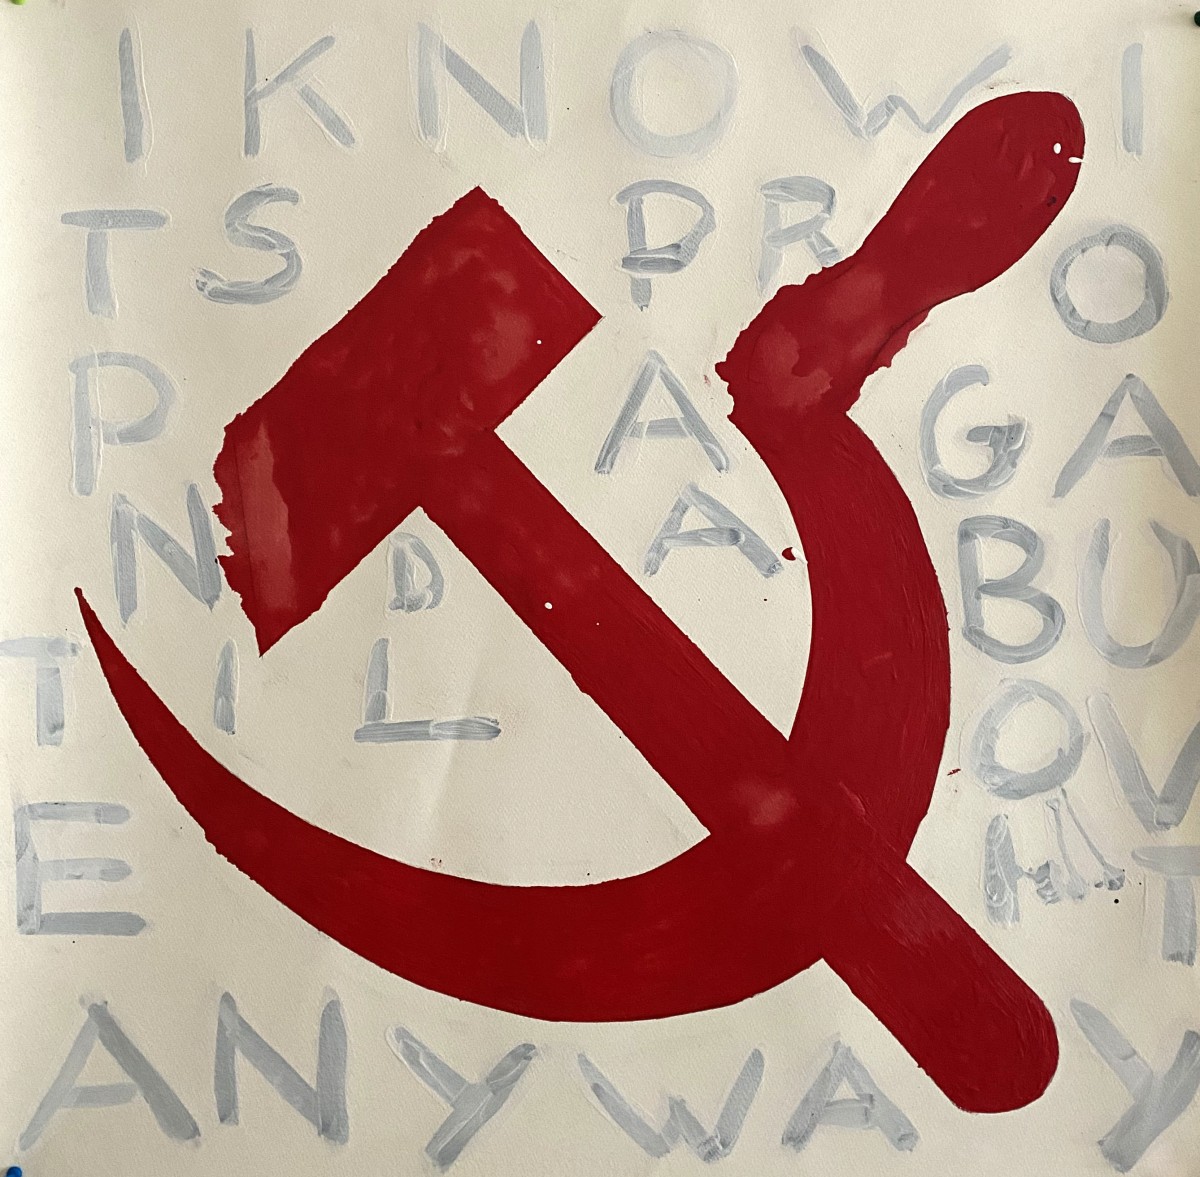 Ania Soliman - Untitled (I Know It’s Propaganda but I Love It Anyway: Red)